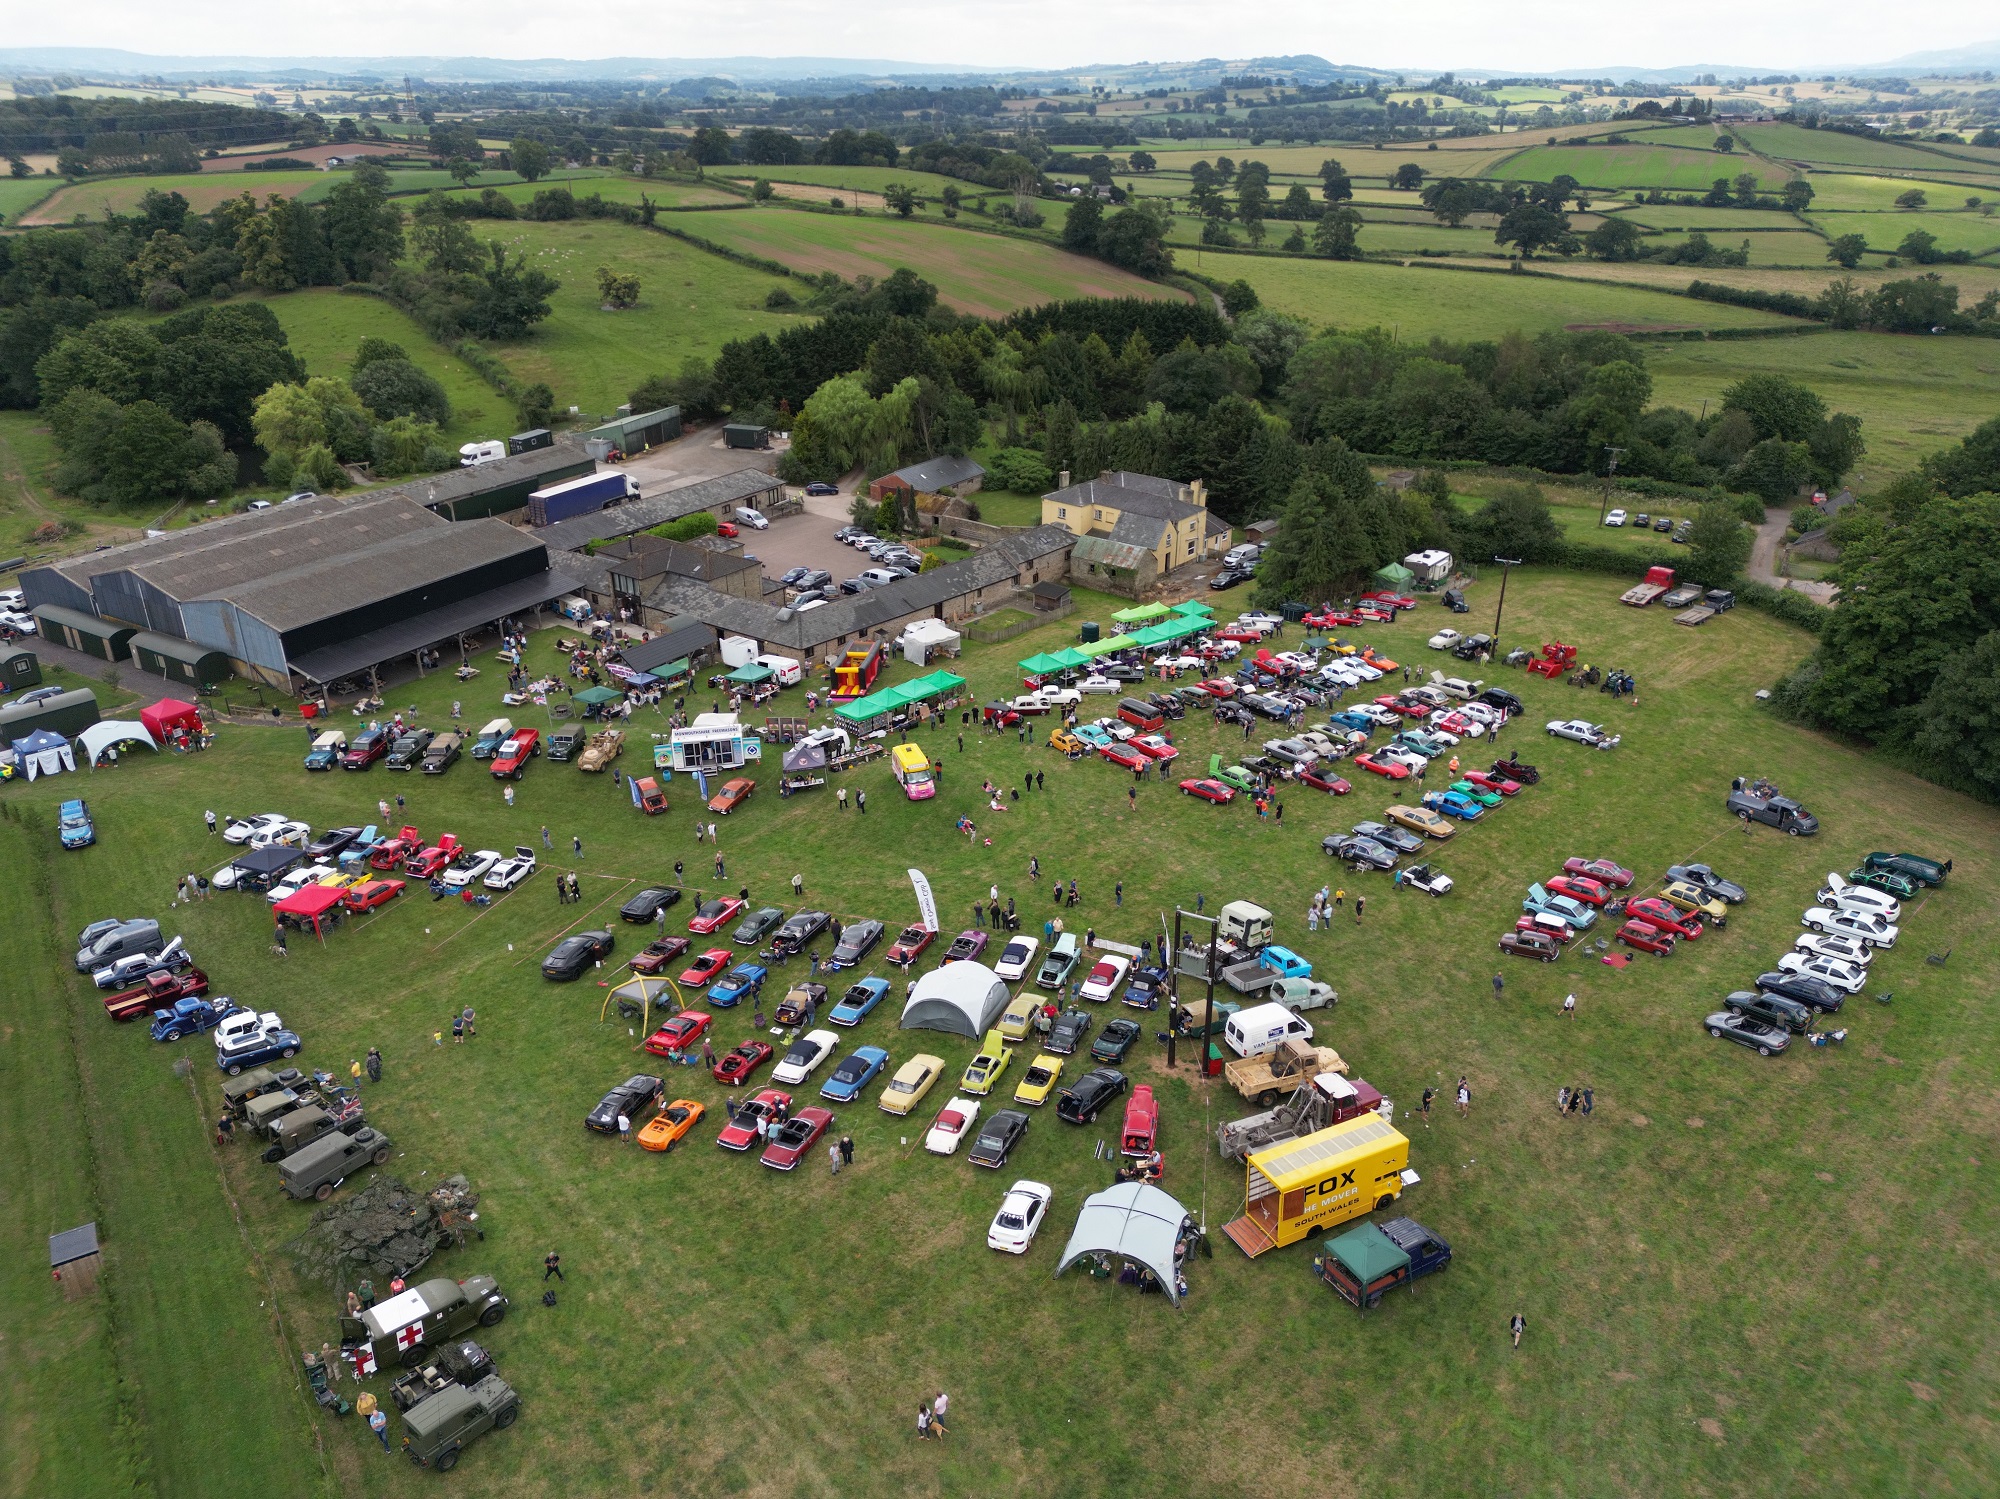 Monmouthshire Classic Vehicle Show from above